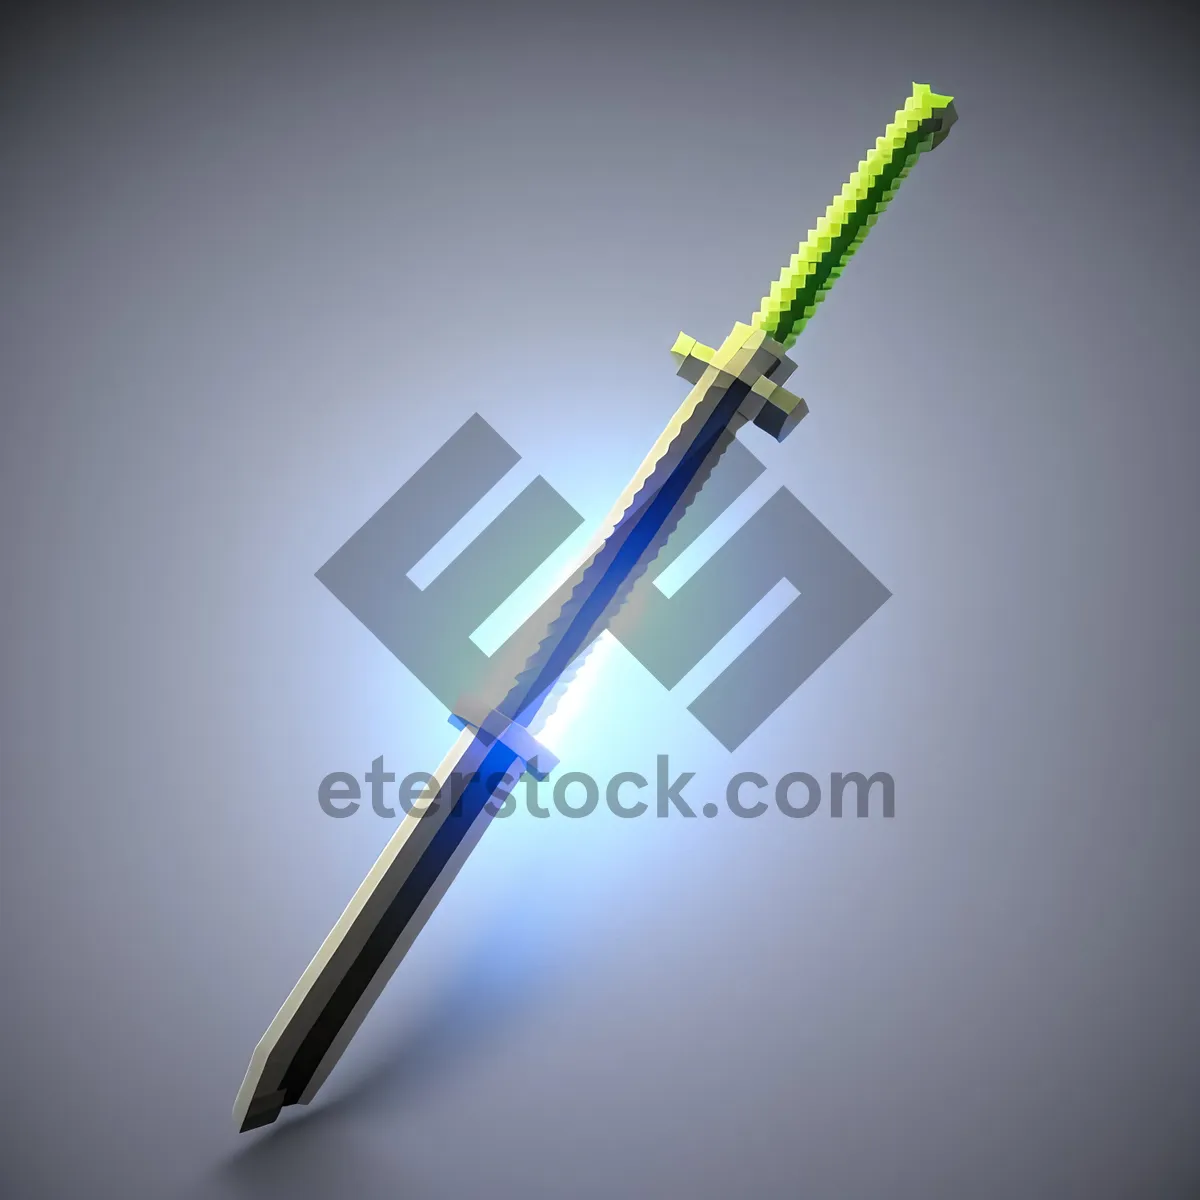 Picture of Office Writing Tool - Syringe Pen